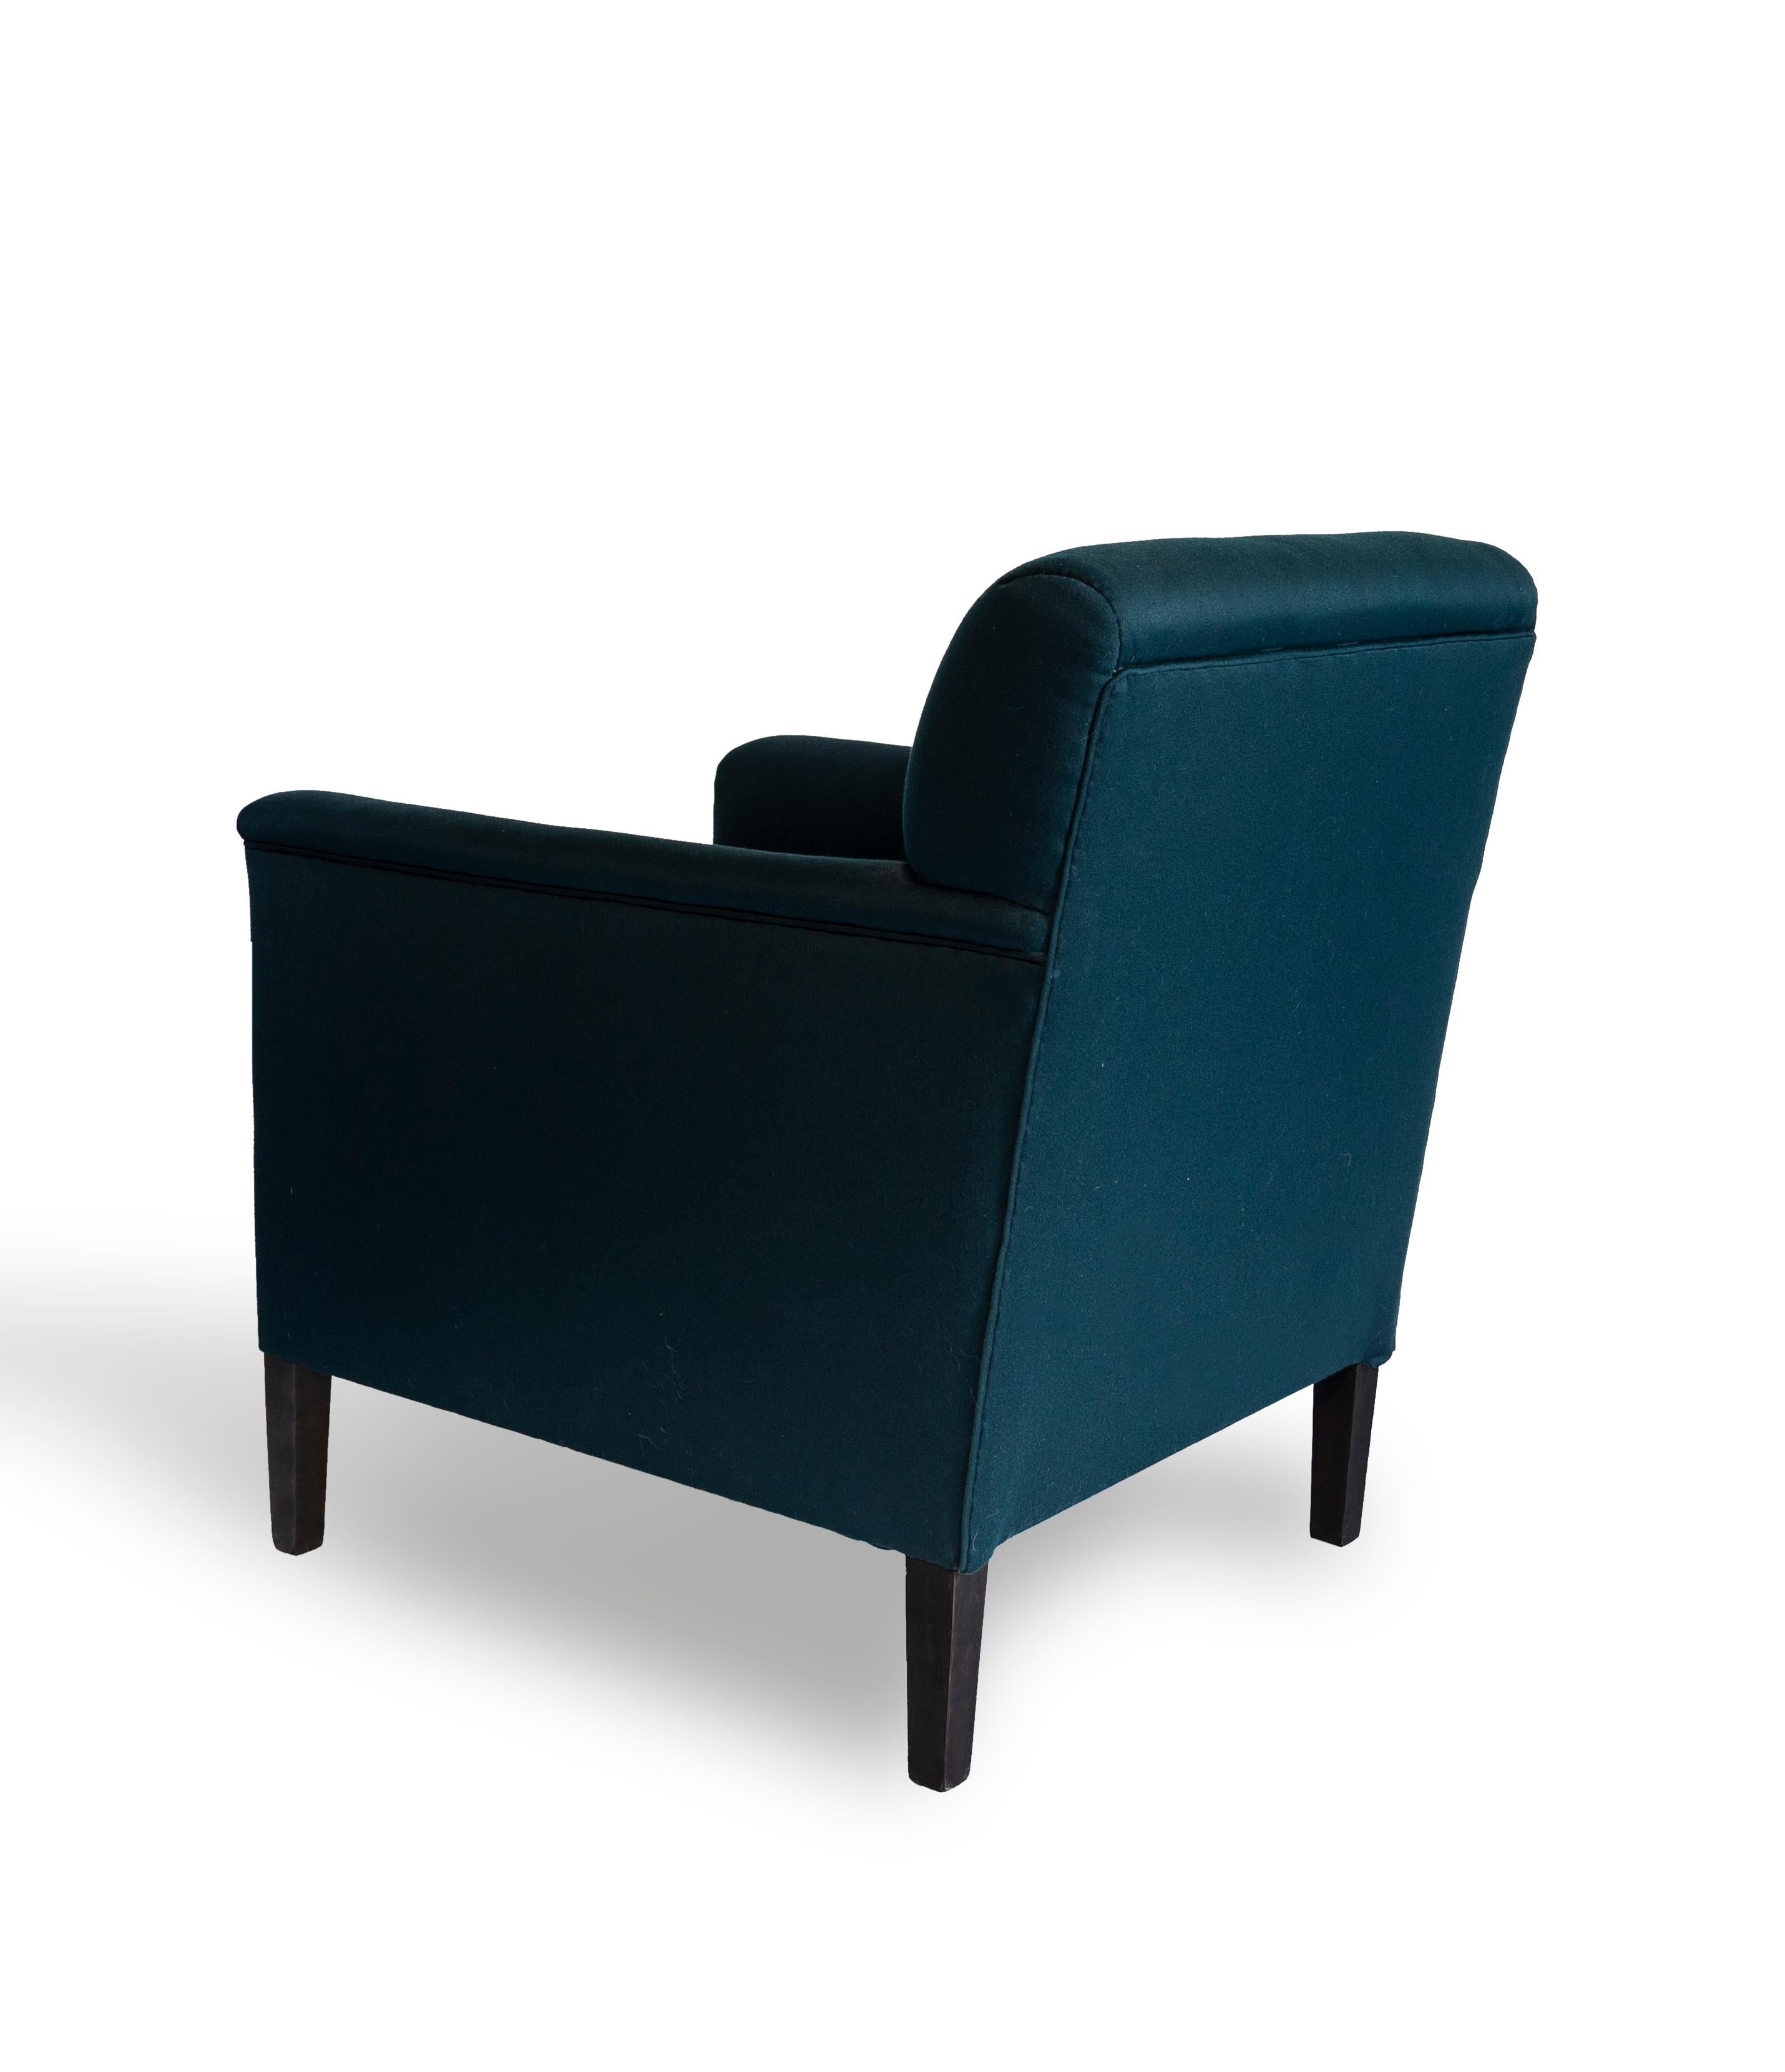 Stained Herbert Upholstered Chair in Wool, Vica designed by Annabelle Selldorf